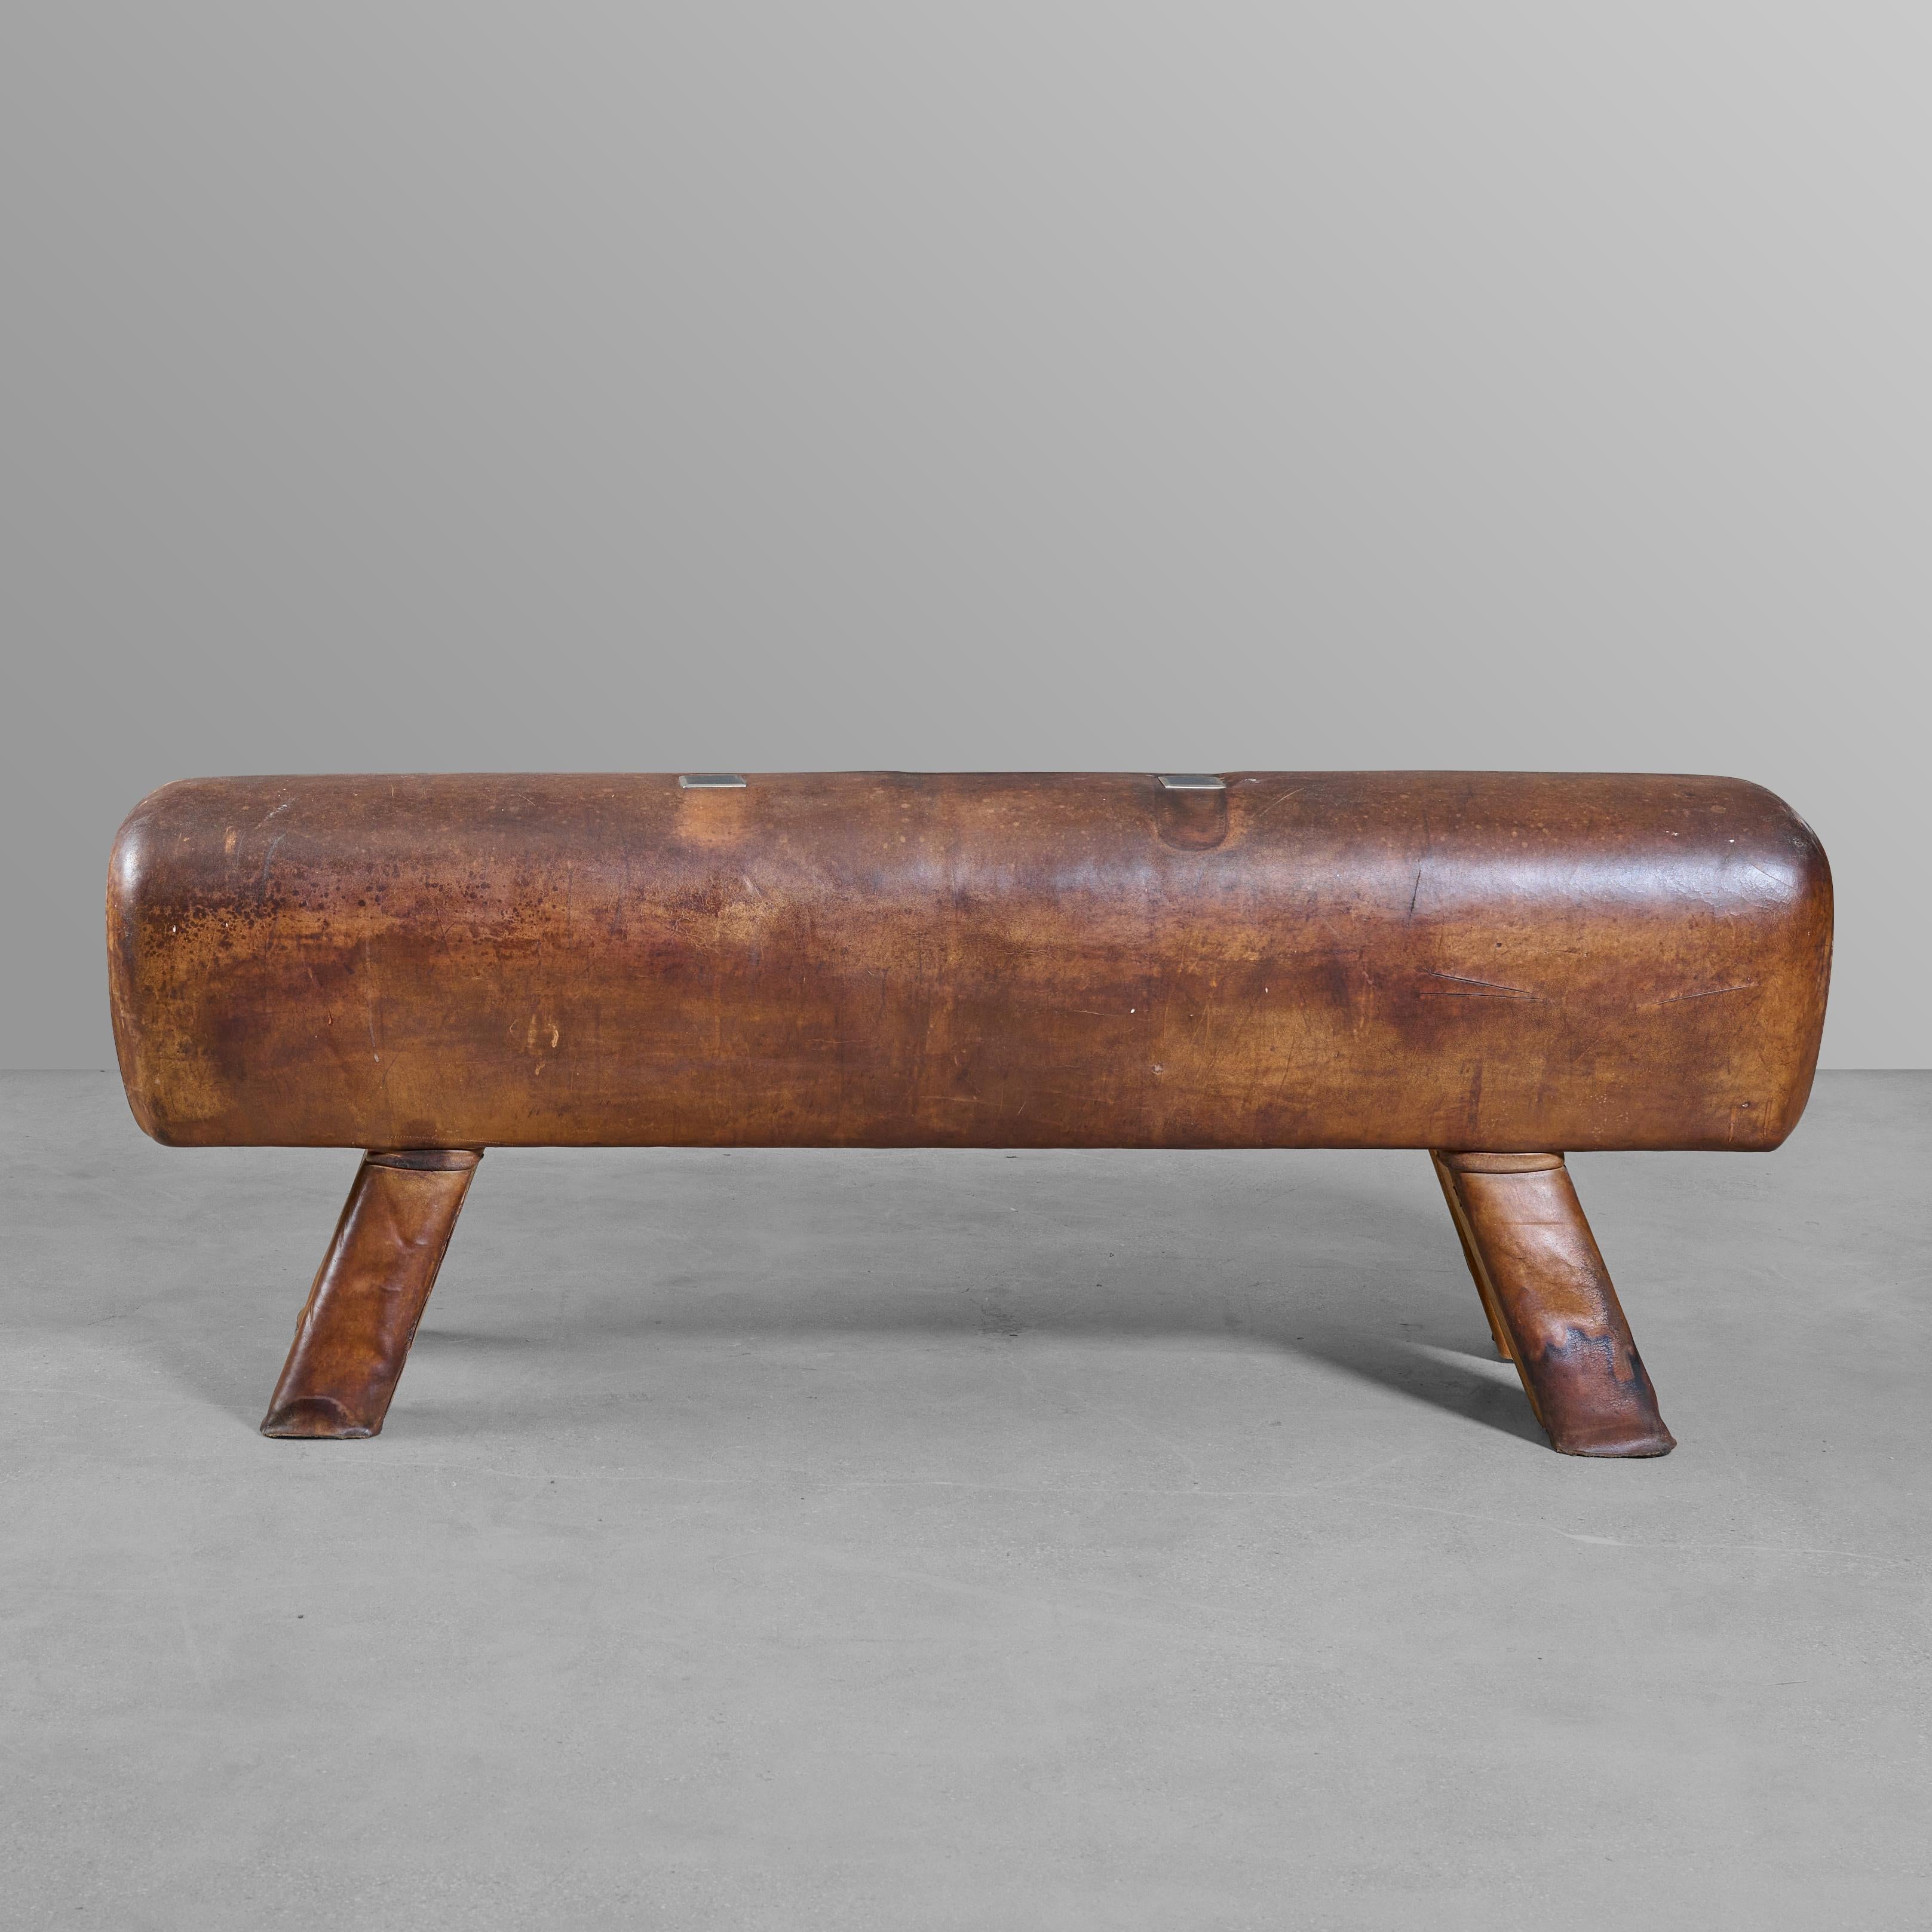 Wood, leather, and iron vaulting horse bench. With nice leather covered legs.